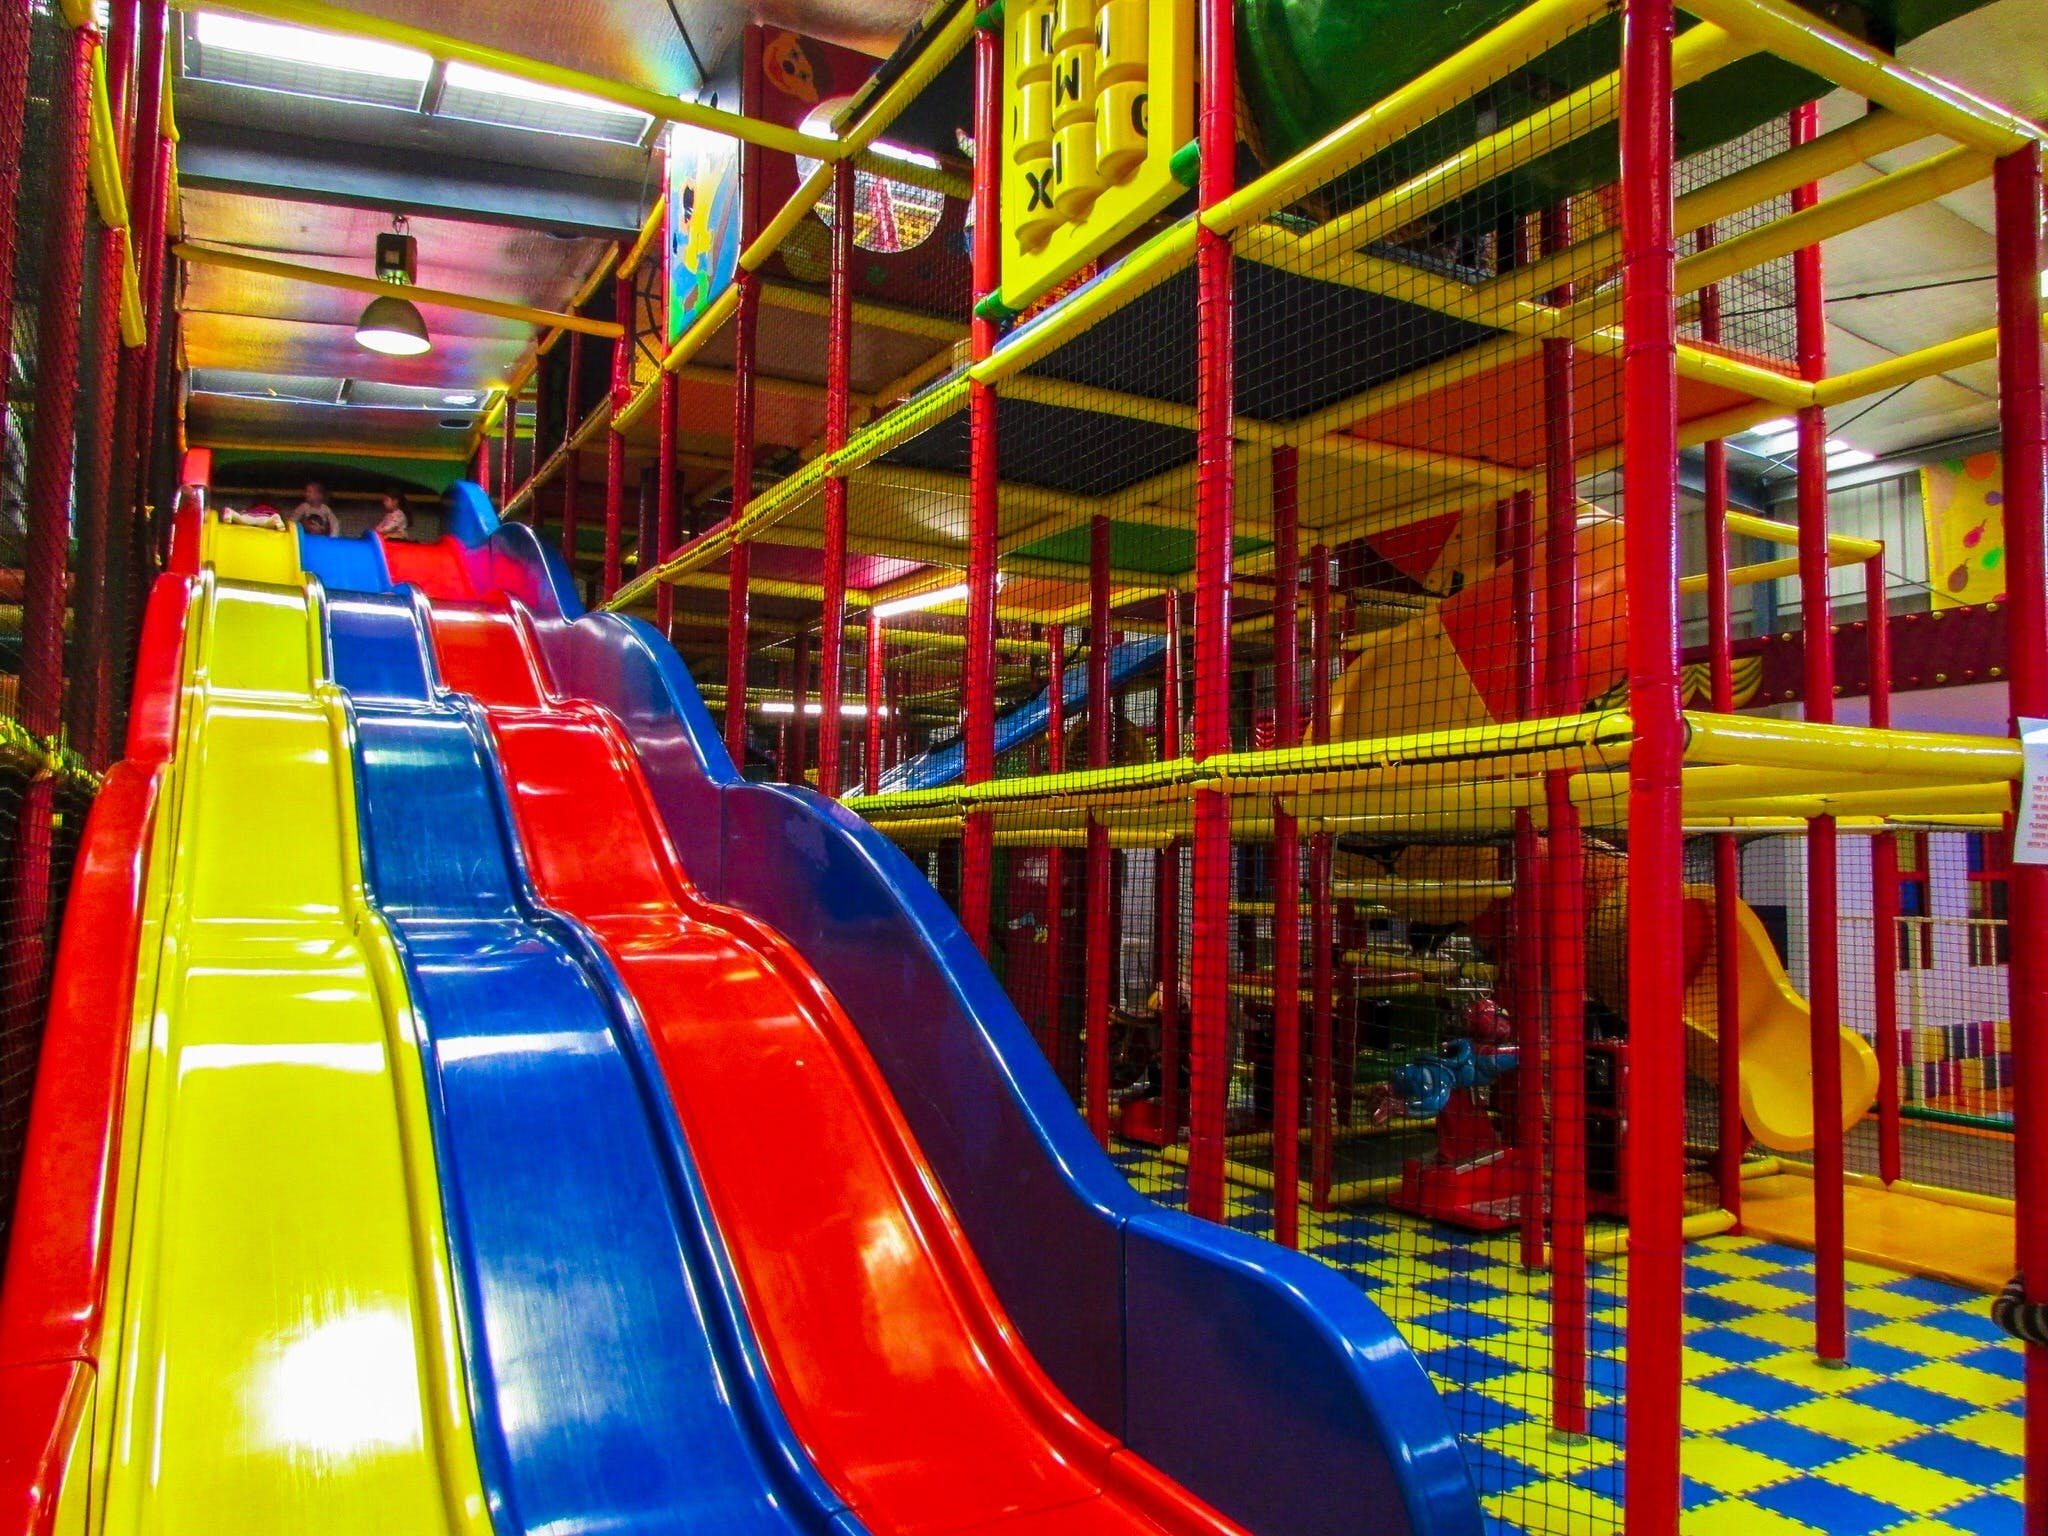 Kidz Shed Indoor Play Centre and Cafe - Tourism Canberra